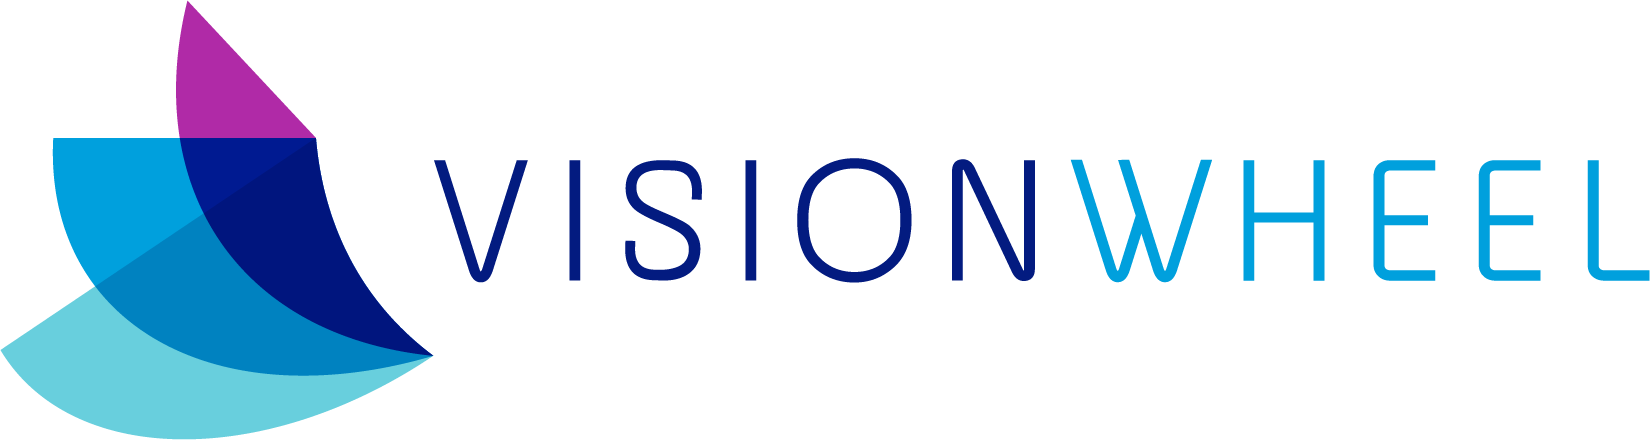 This image displays the logo for Vision Wheel, an internal communications agency specialized in creating one-of-a-kind employee experiences, result-defining employee education and long-lasting employee engagement.